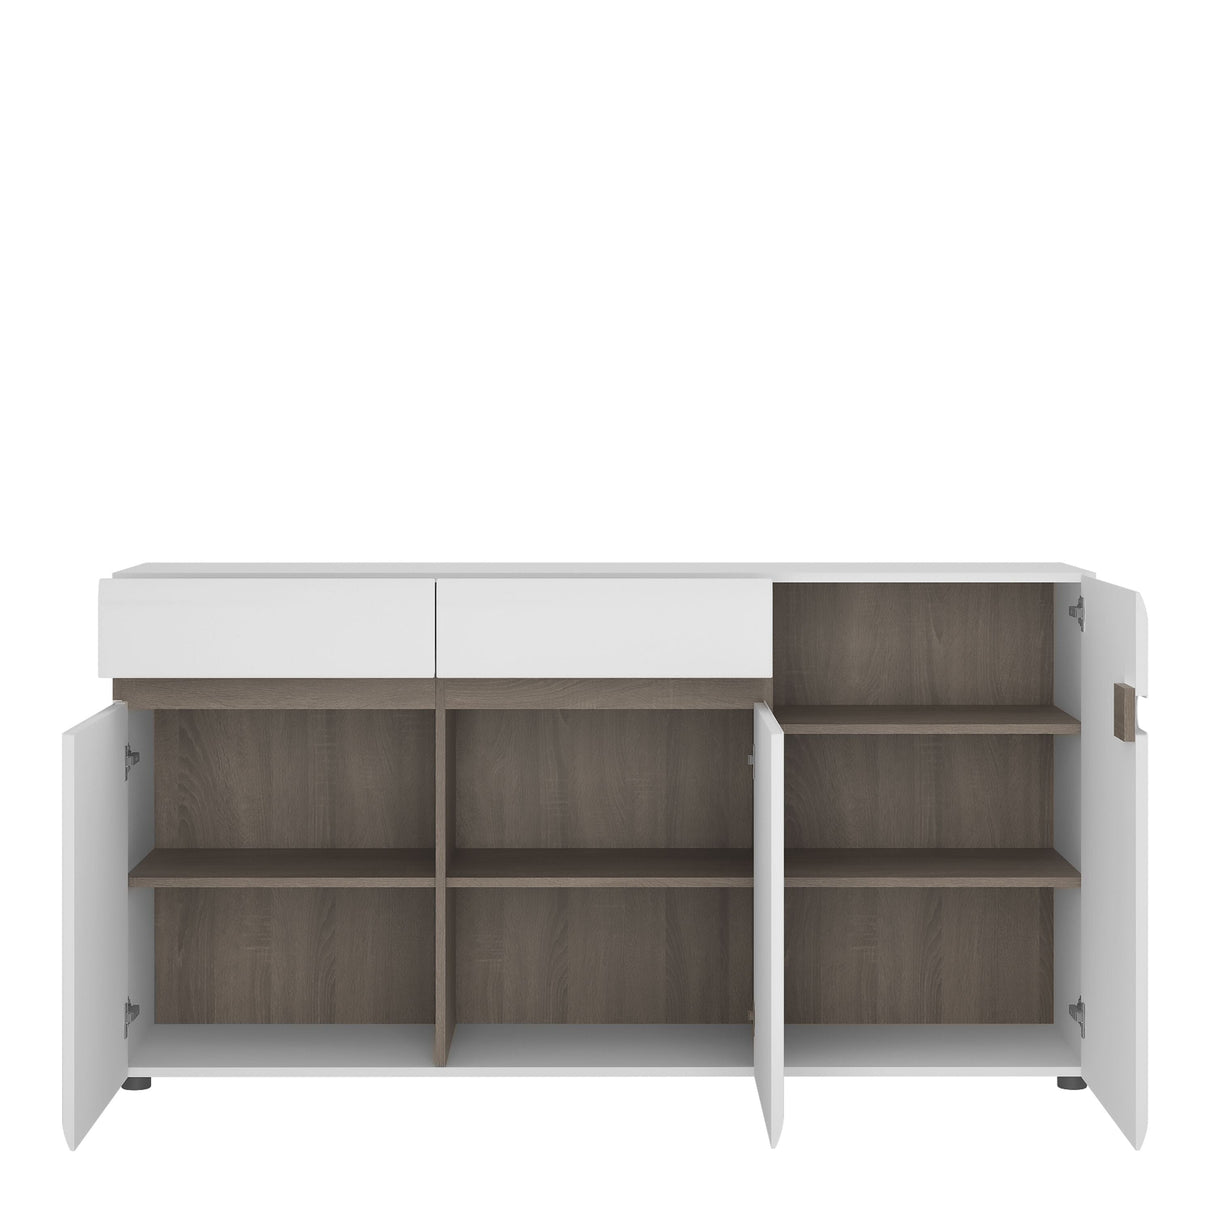 Furniture To Go Chelsea 2 Drawer 3 Door 164cm Wide Sideboard in Gloss White and Oak (4024044)